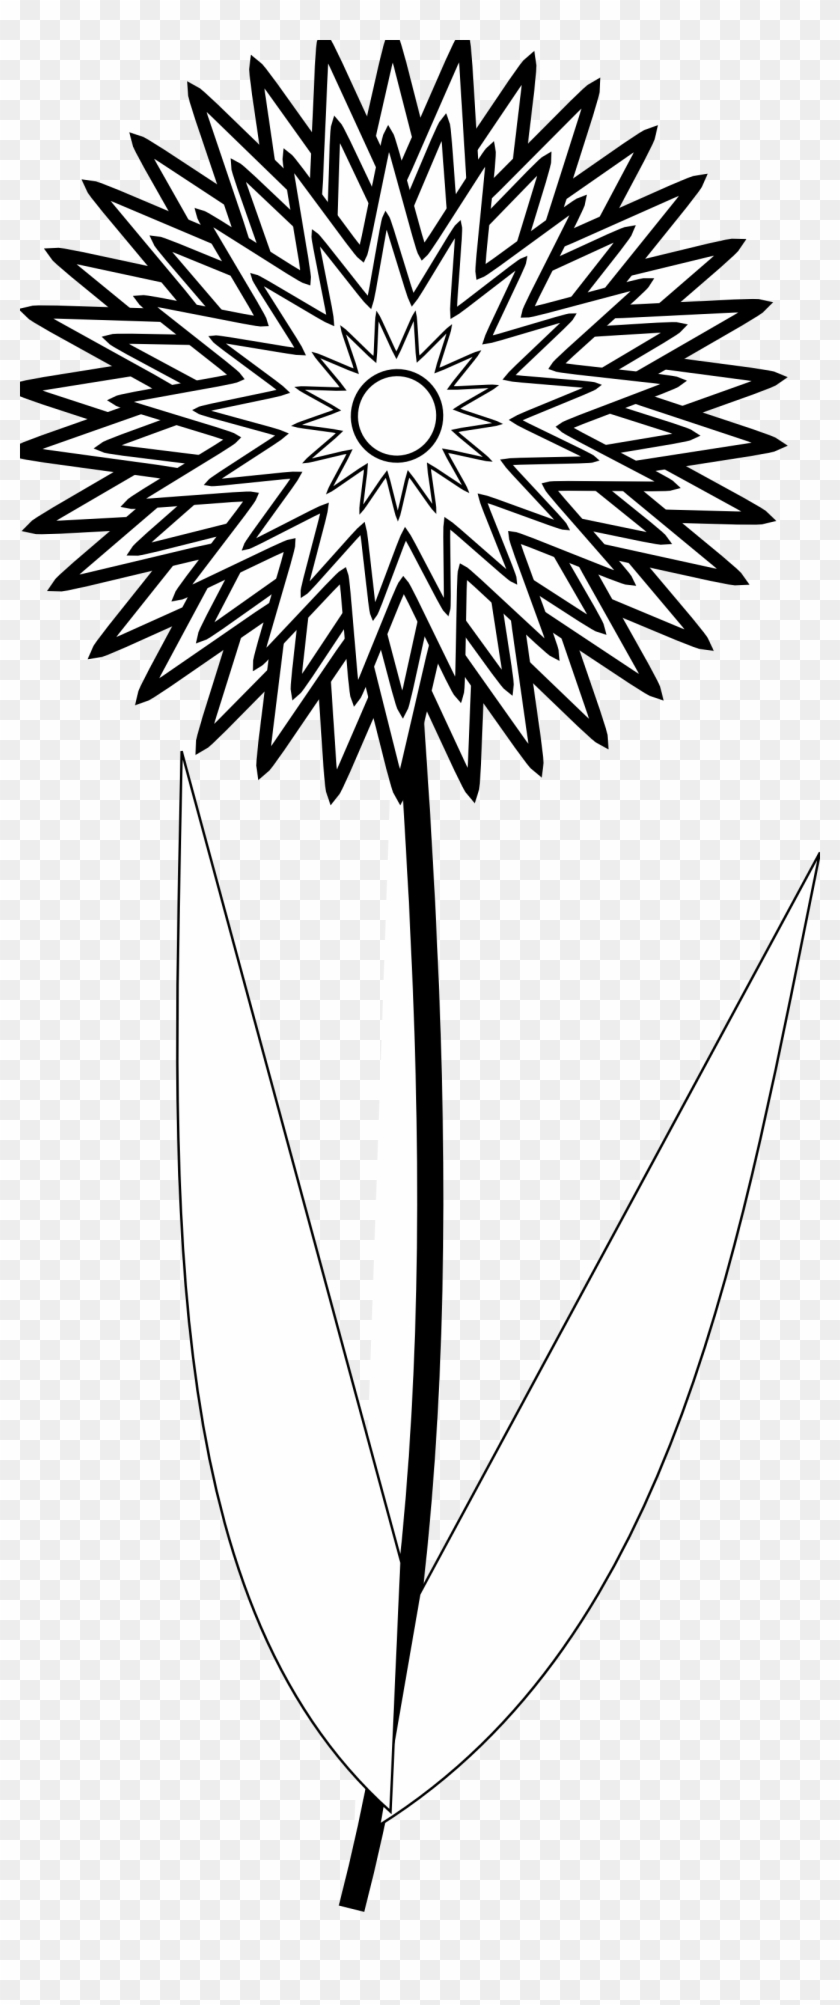 Black White Flower Tattoos - Earth And Sun Coloring Pages #830388